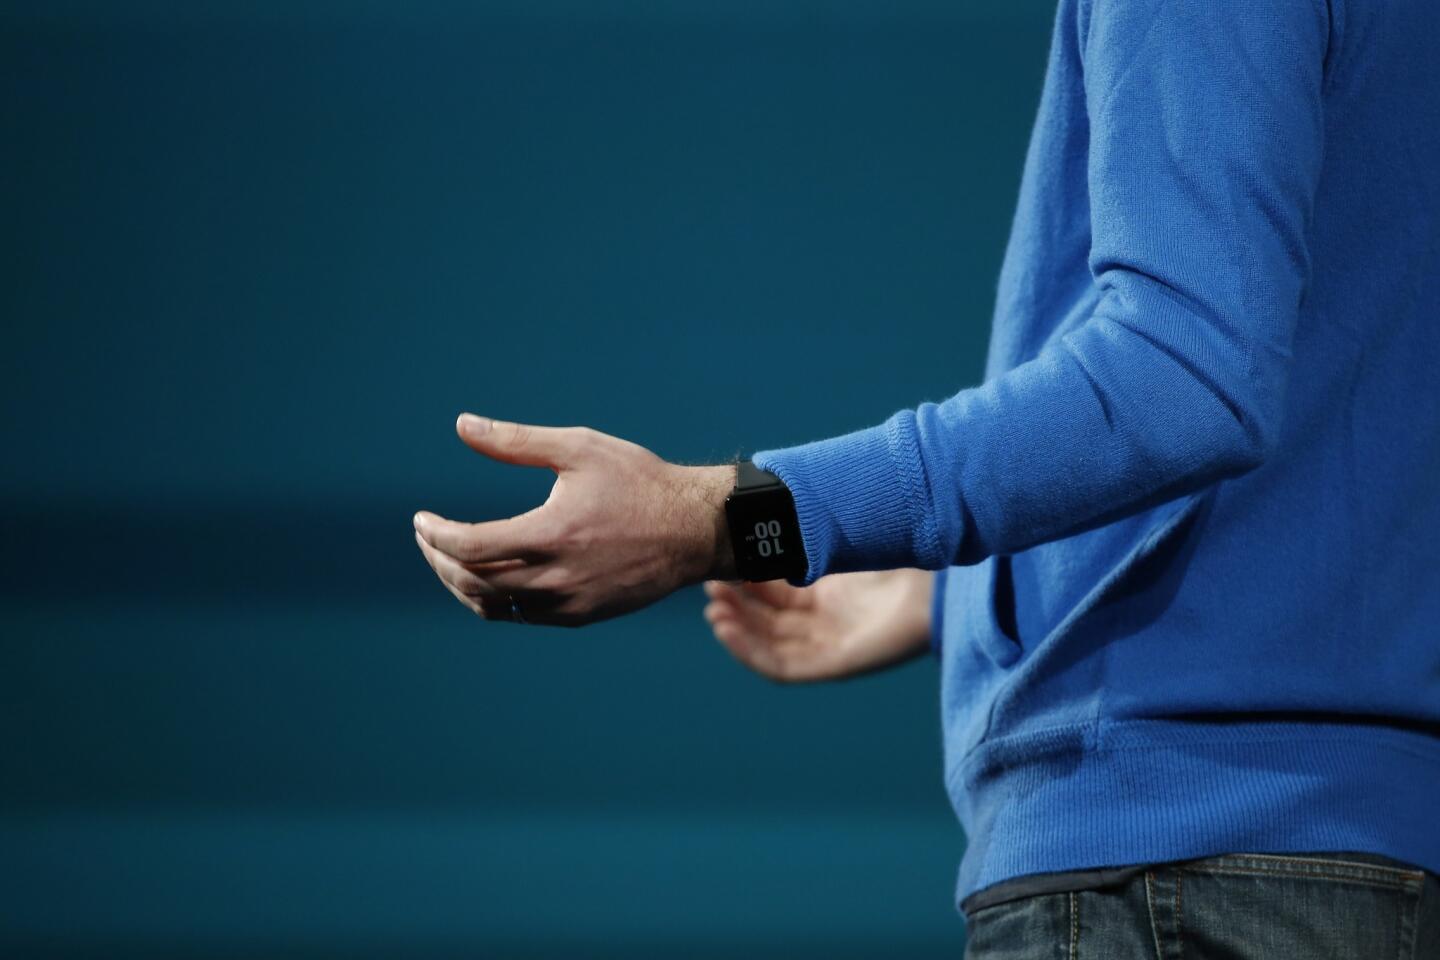 Google Android Wear watch